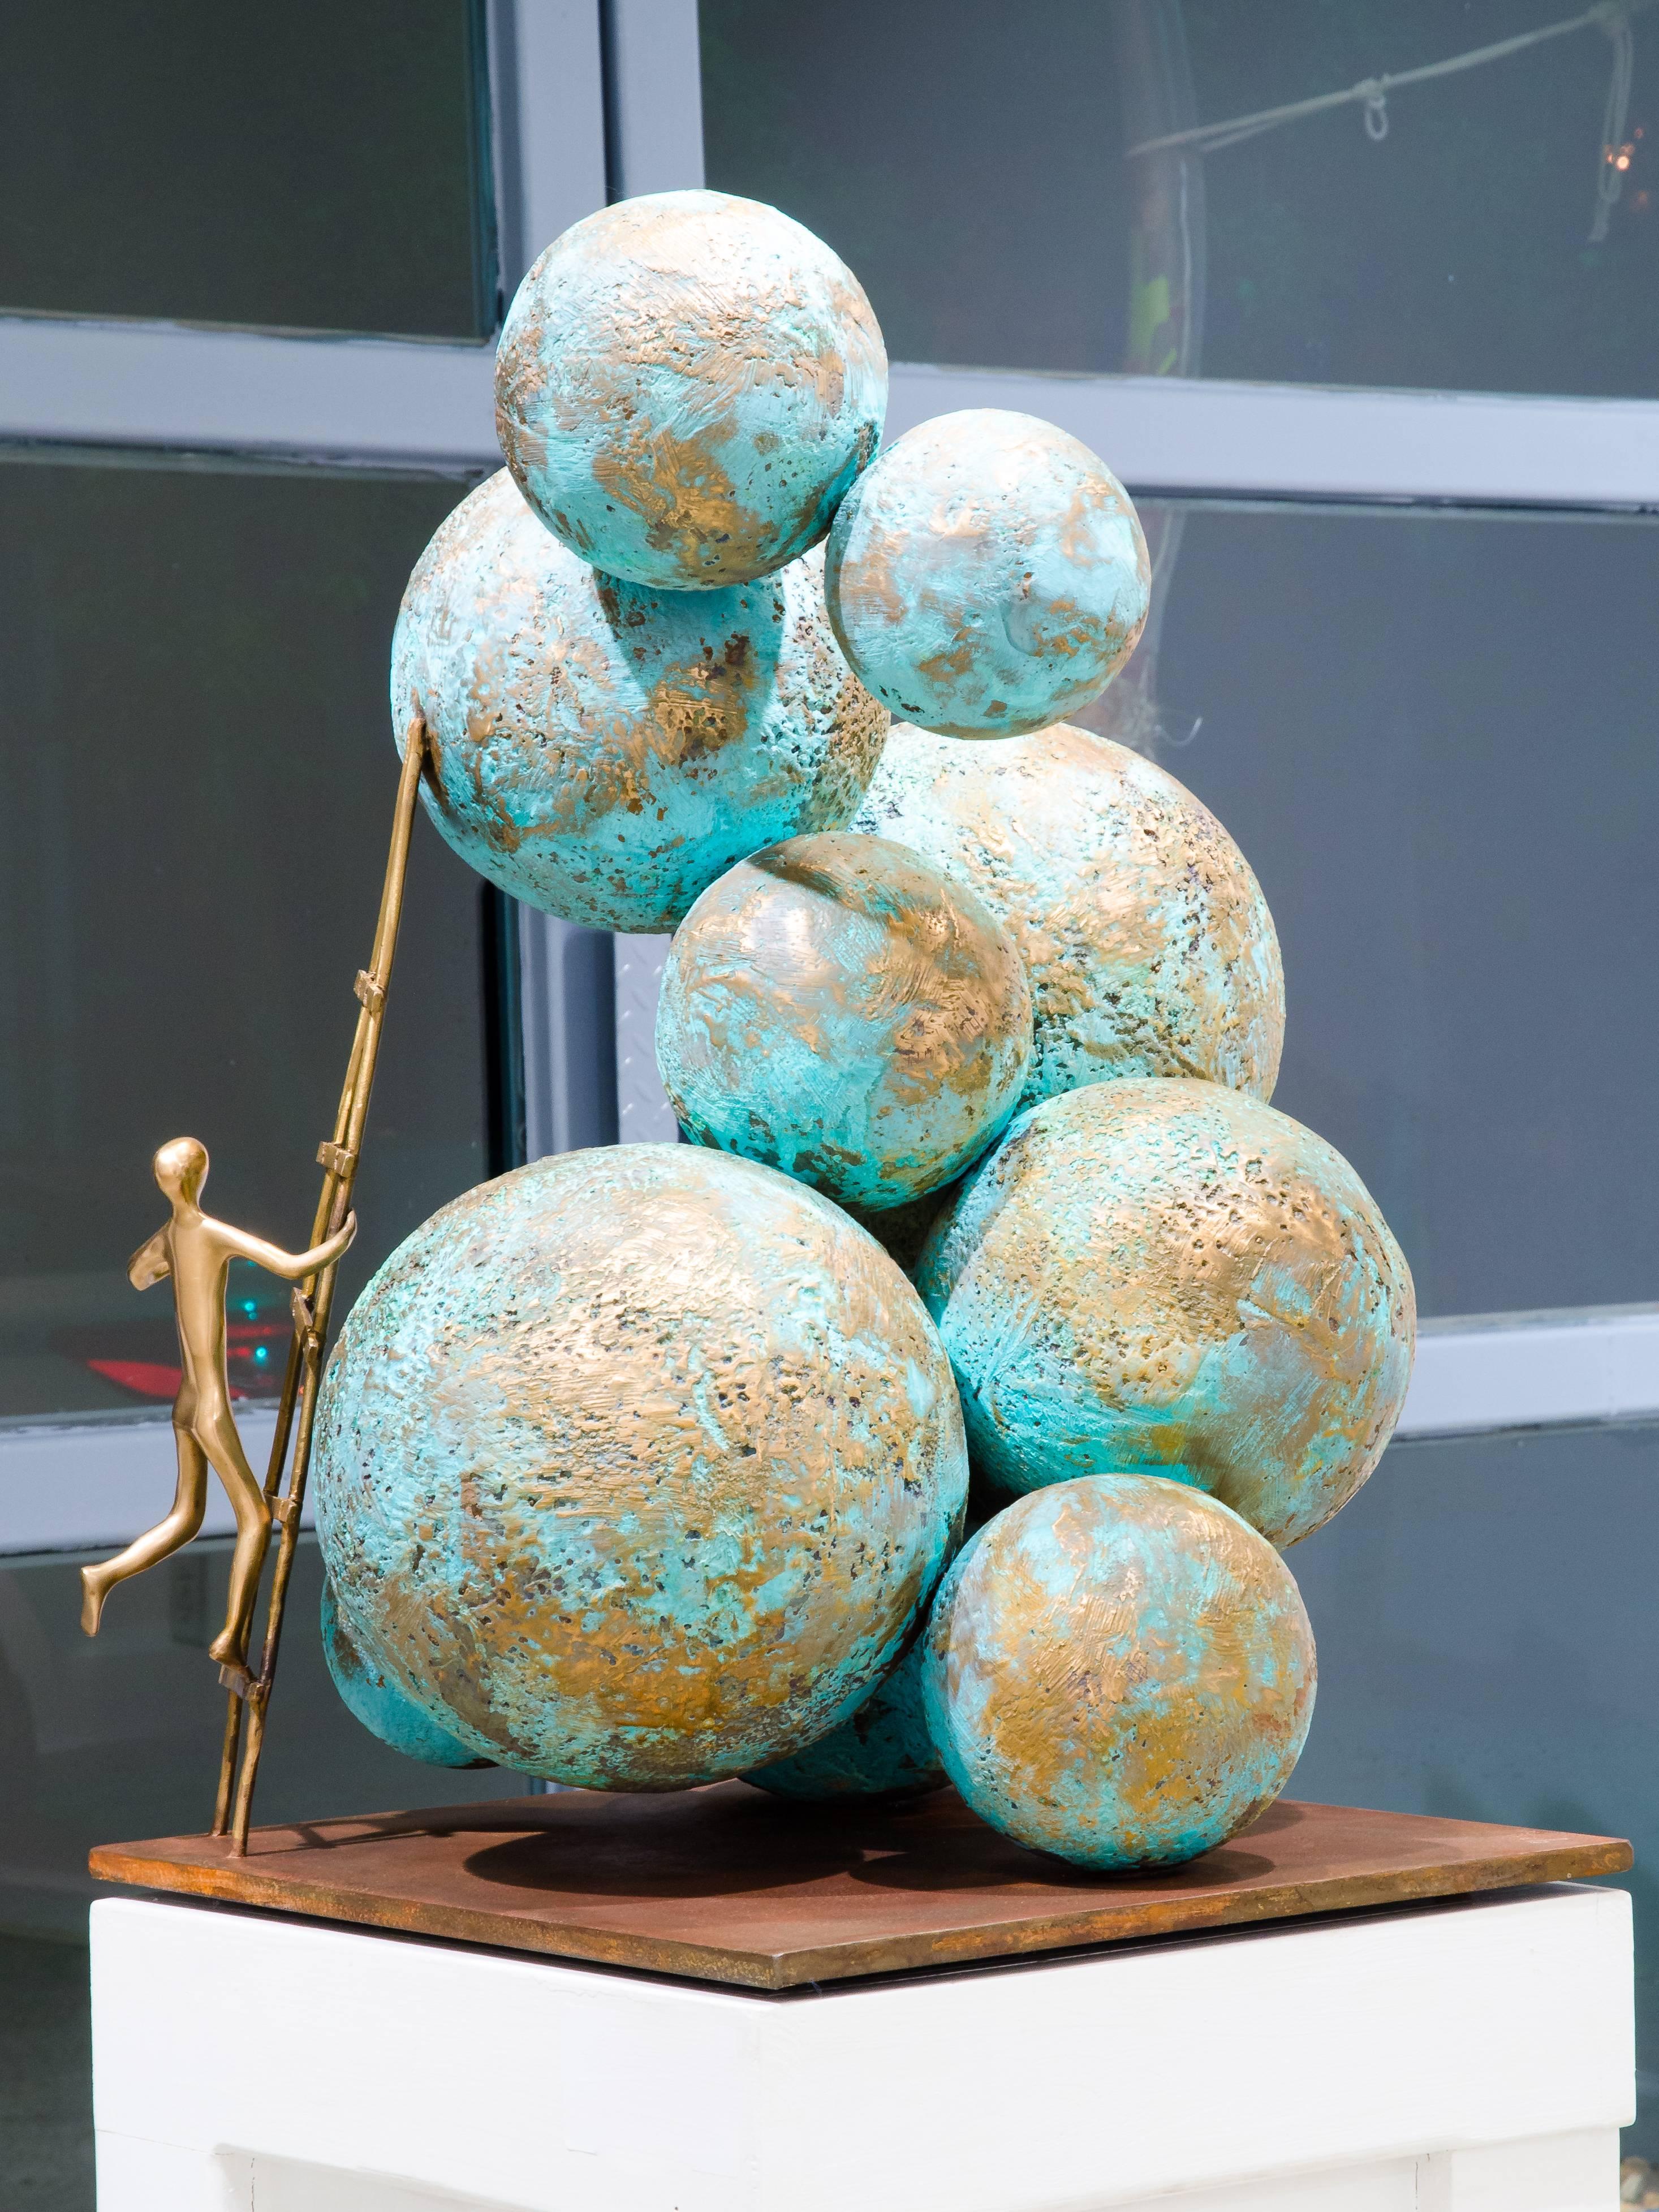 Climbing worlds is a contemporary bronze sculpture where Beatriz Gerenstein shows spheres with blue, green and golden tones floating as were planets in the outer space. 
The golden ladder that completes the composition adds an intriguing element.